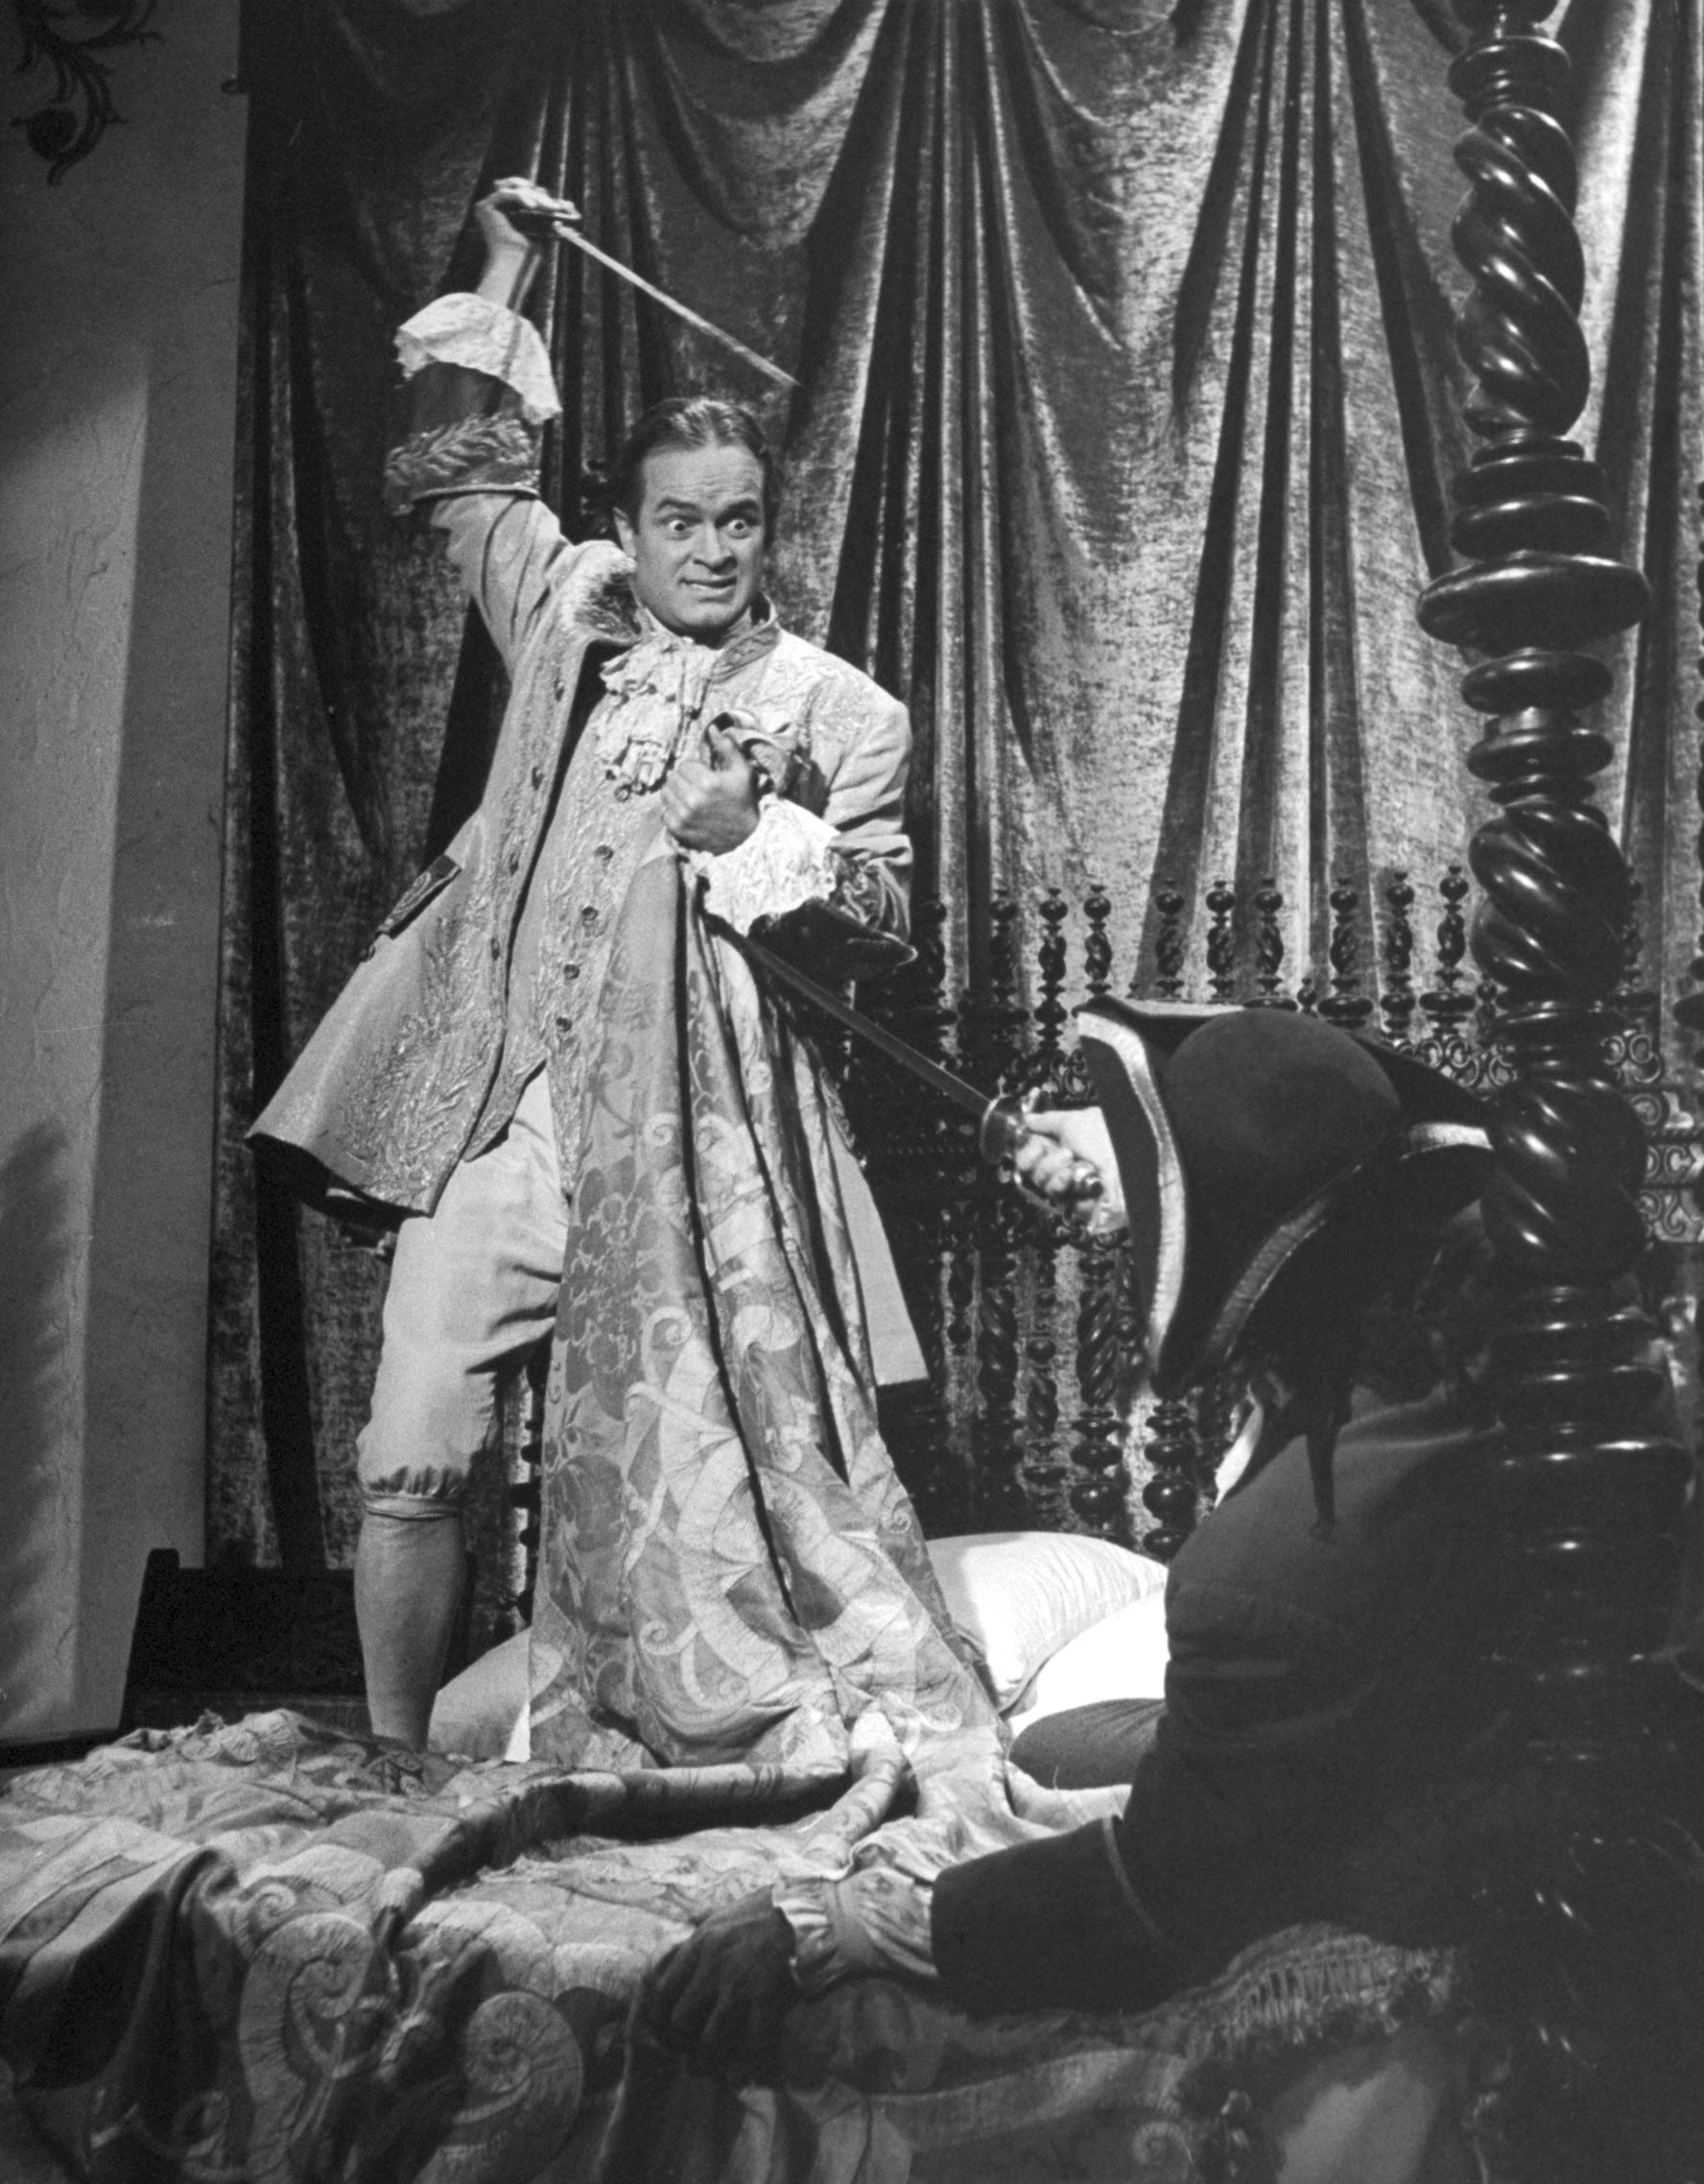 Bob Hope wielding a sword in scene from the movie, Monsieur Beaucaire.